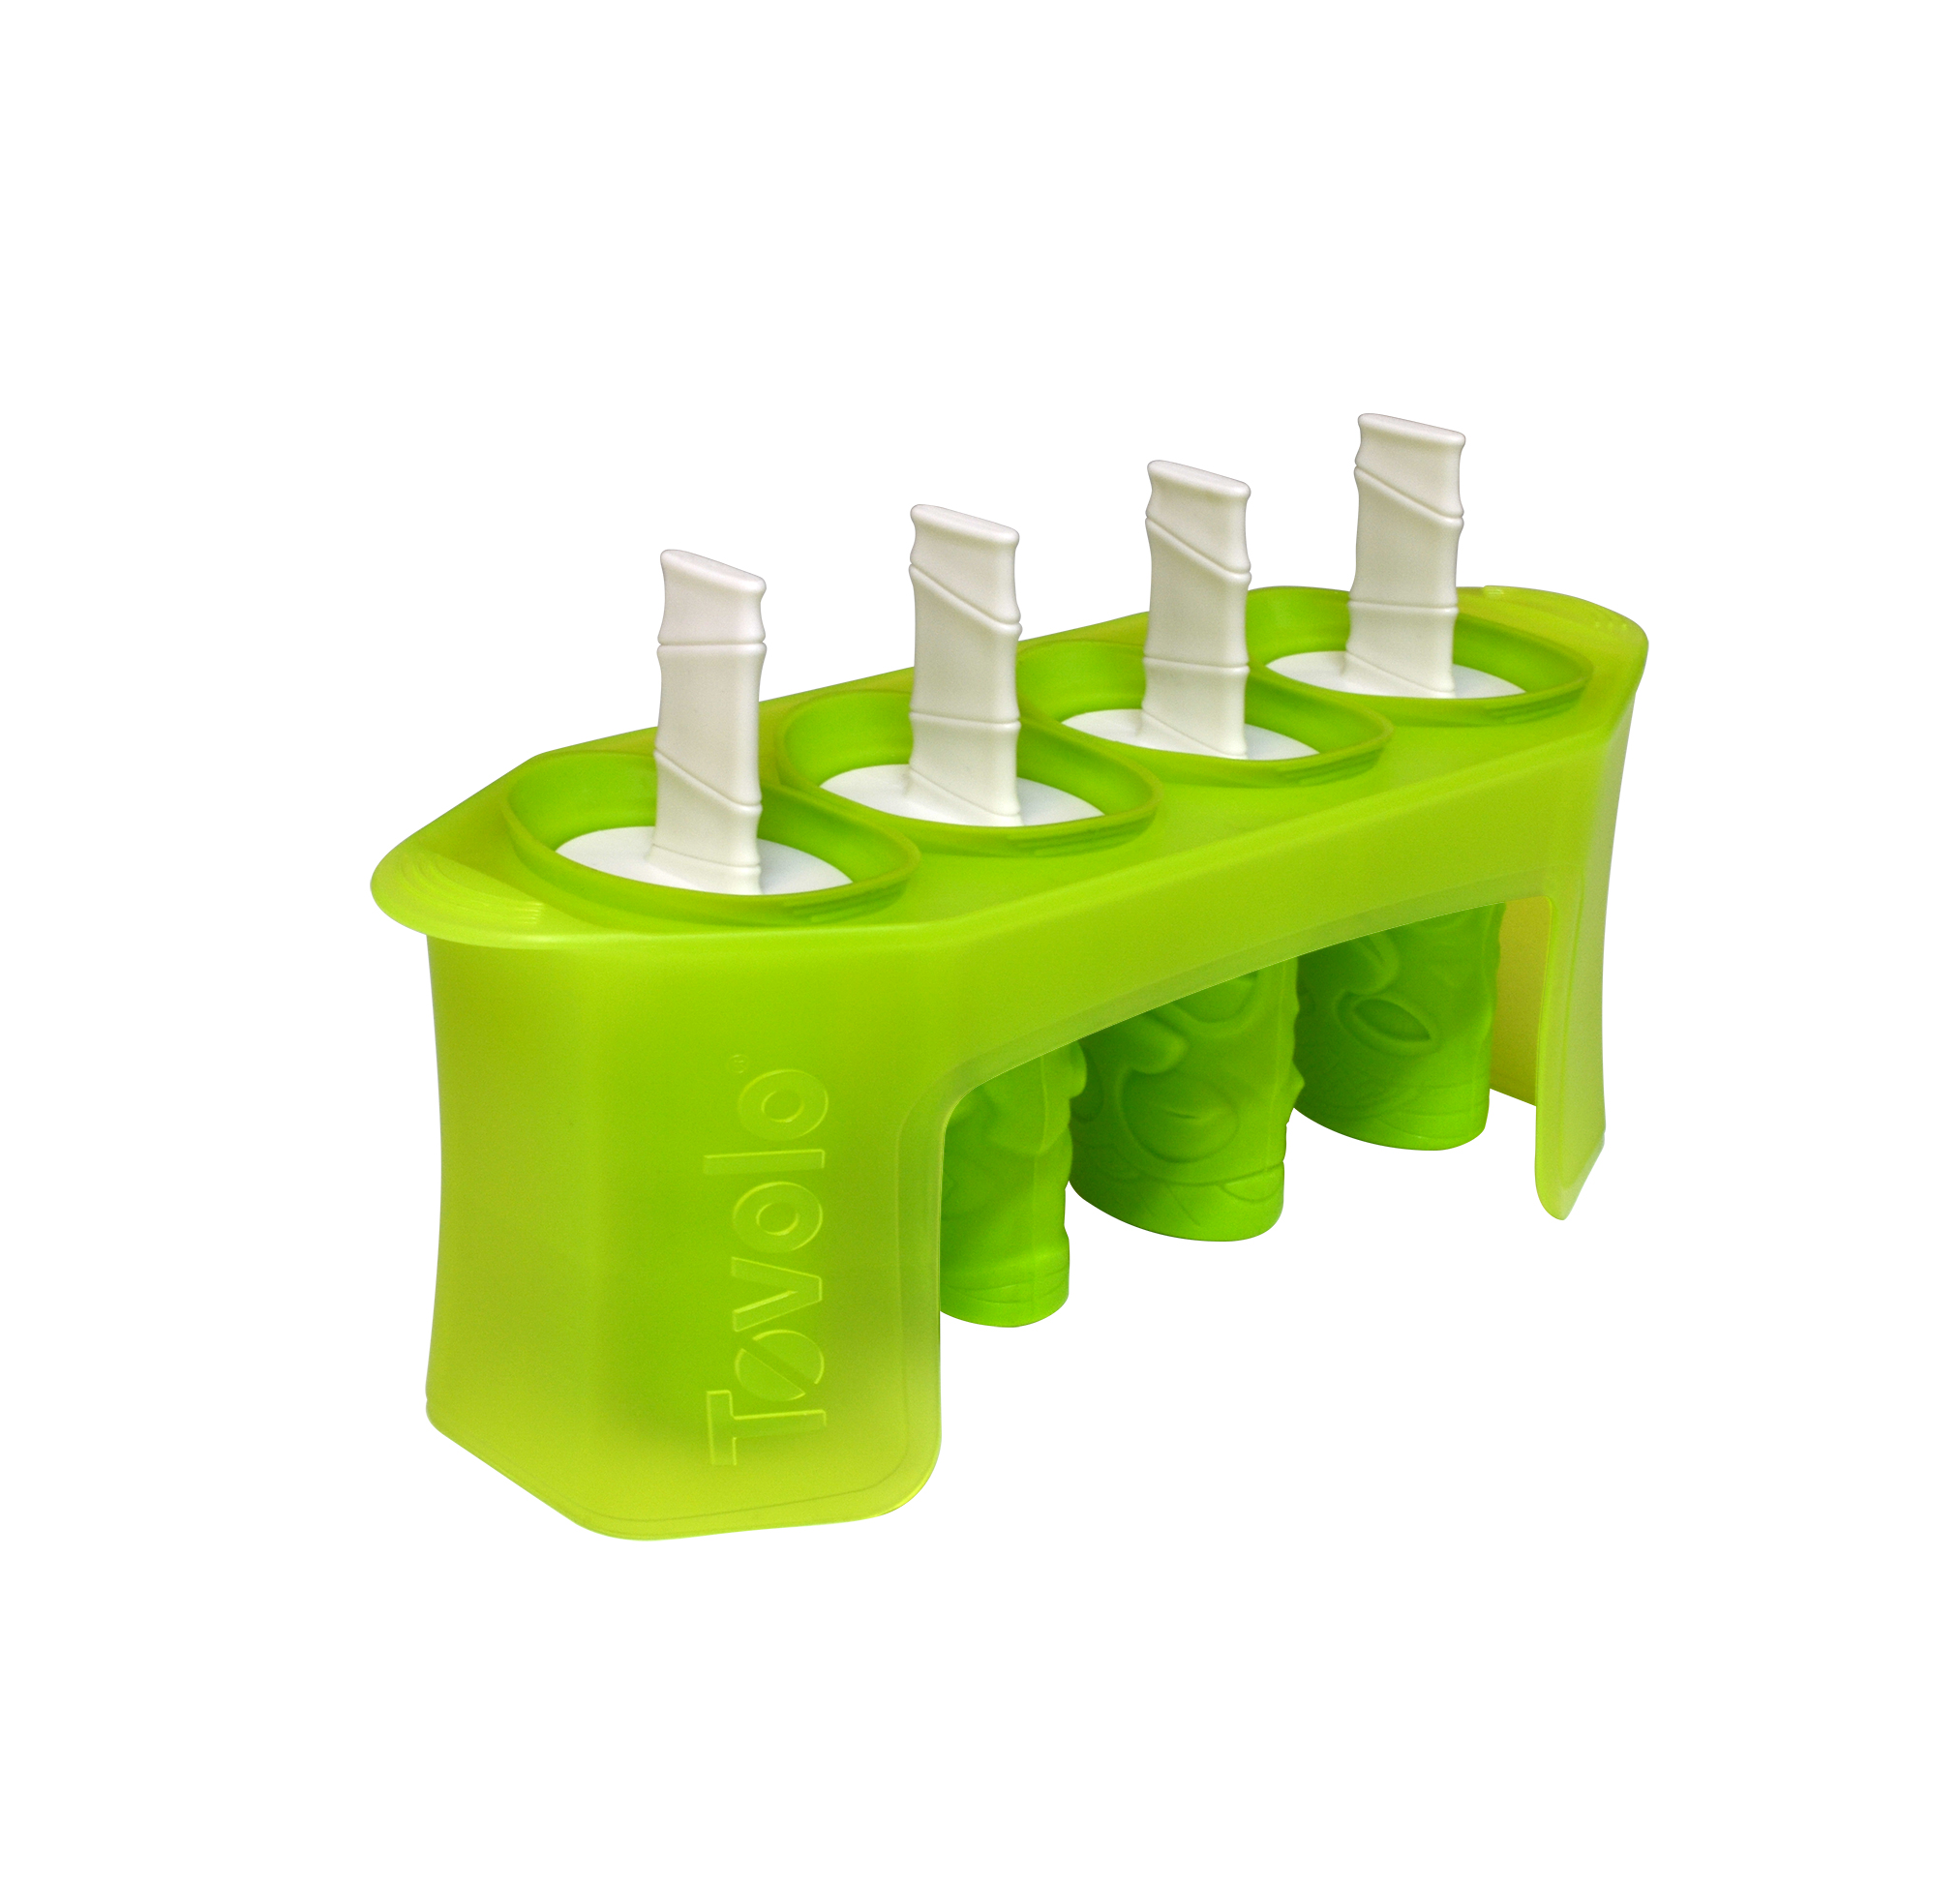 Tovolo Tikis Silicone Popsicle Molds Set with Base, Set of 4 - image 2 of 4